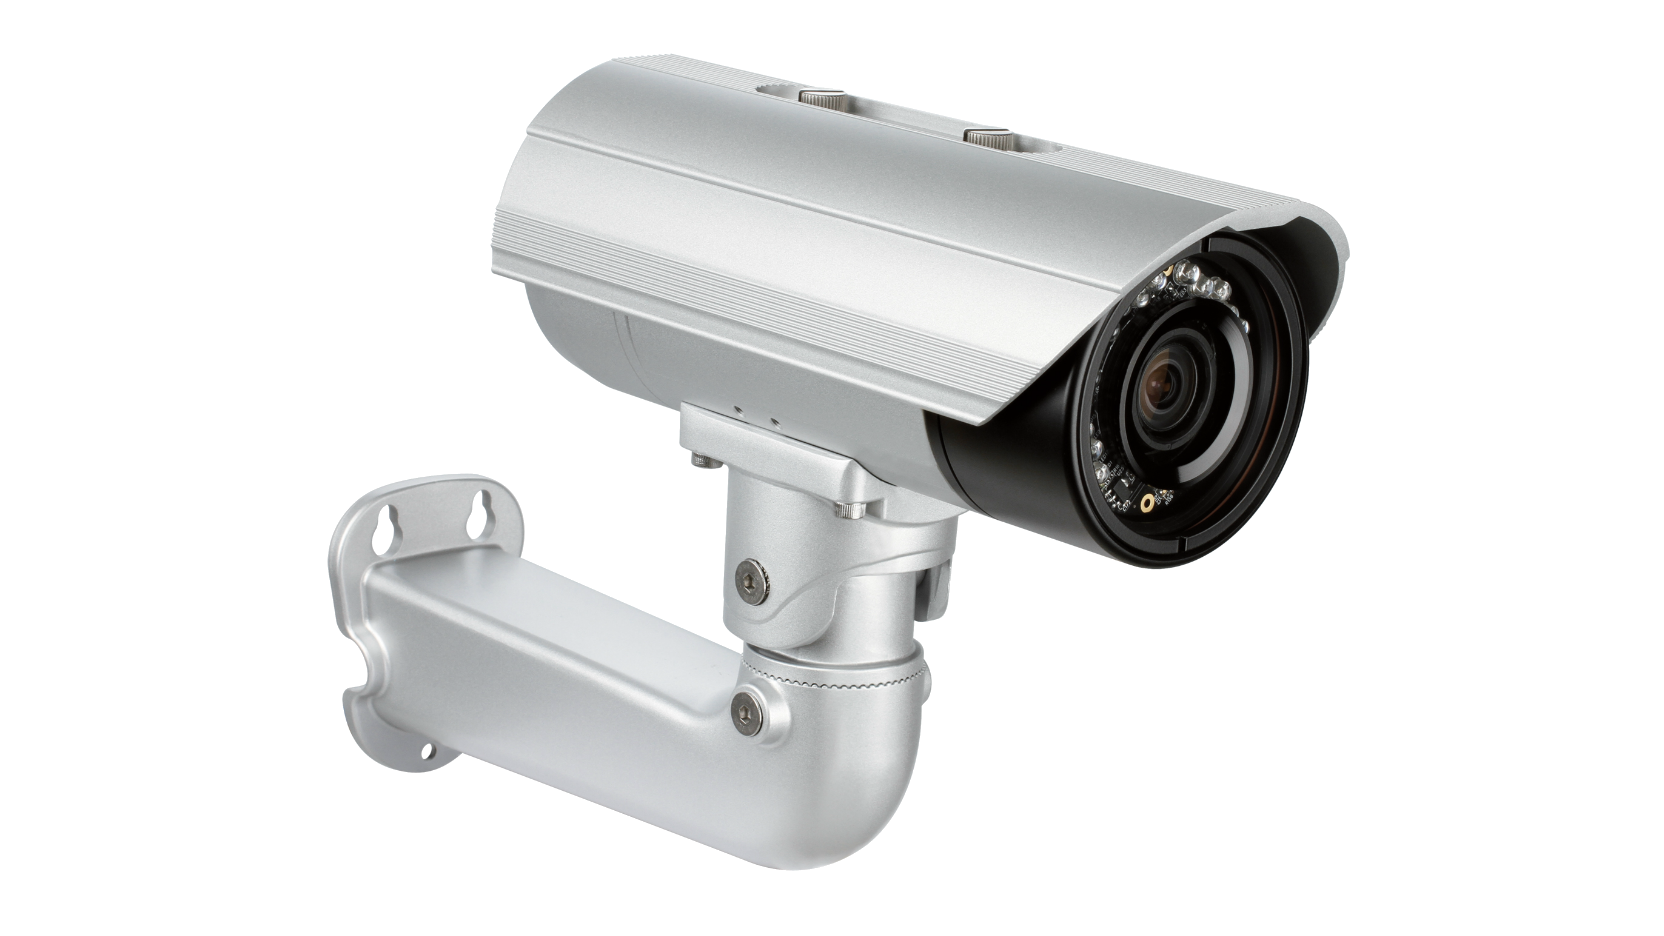 DCS-6510 - D-Link 3.7mm Network Surveillance Dome Camera Day and Night